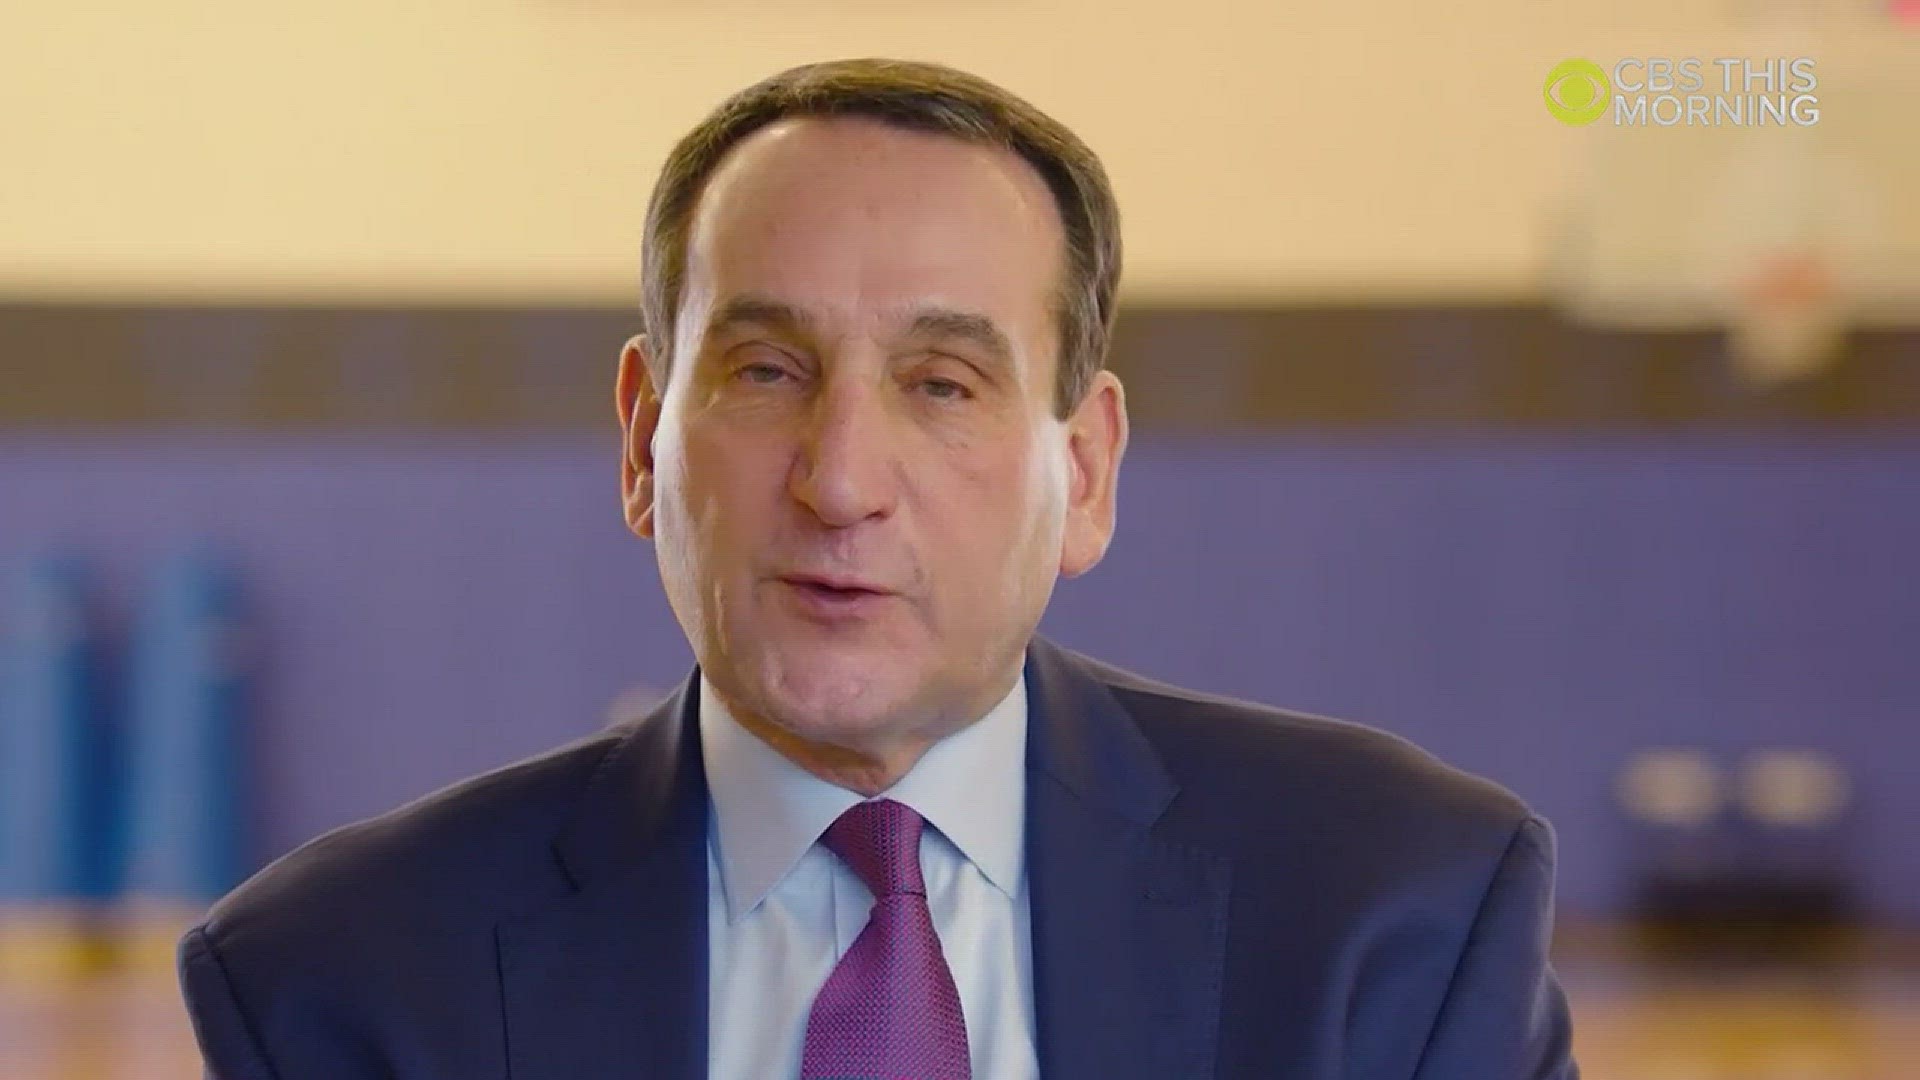 The man known as Coach K writes a letter to his younger self and shares his historic path to becoming the most winning coach in Division I college basketball.